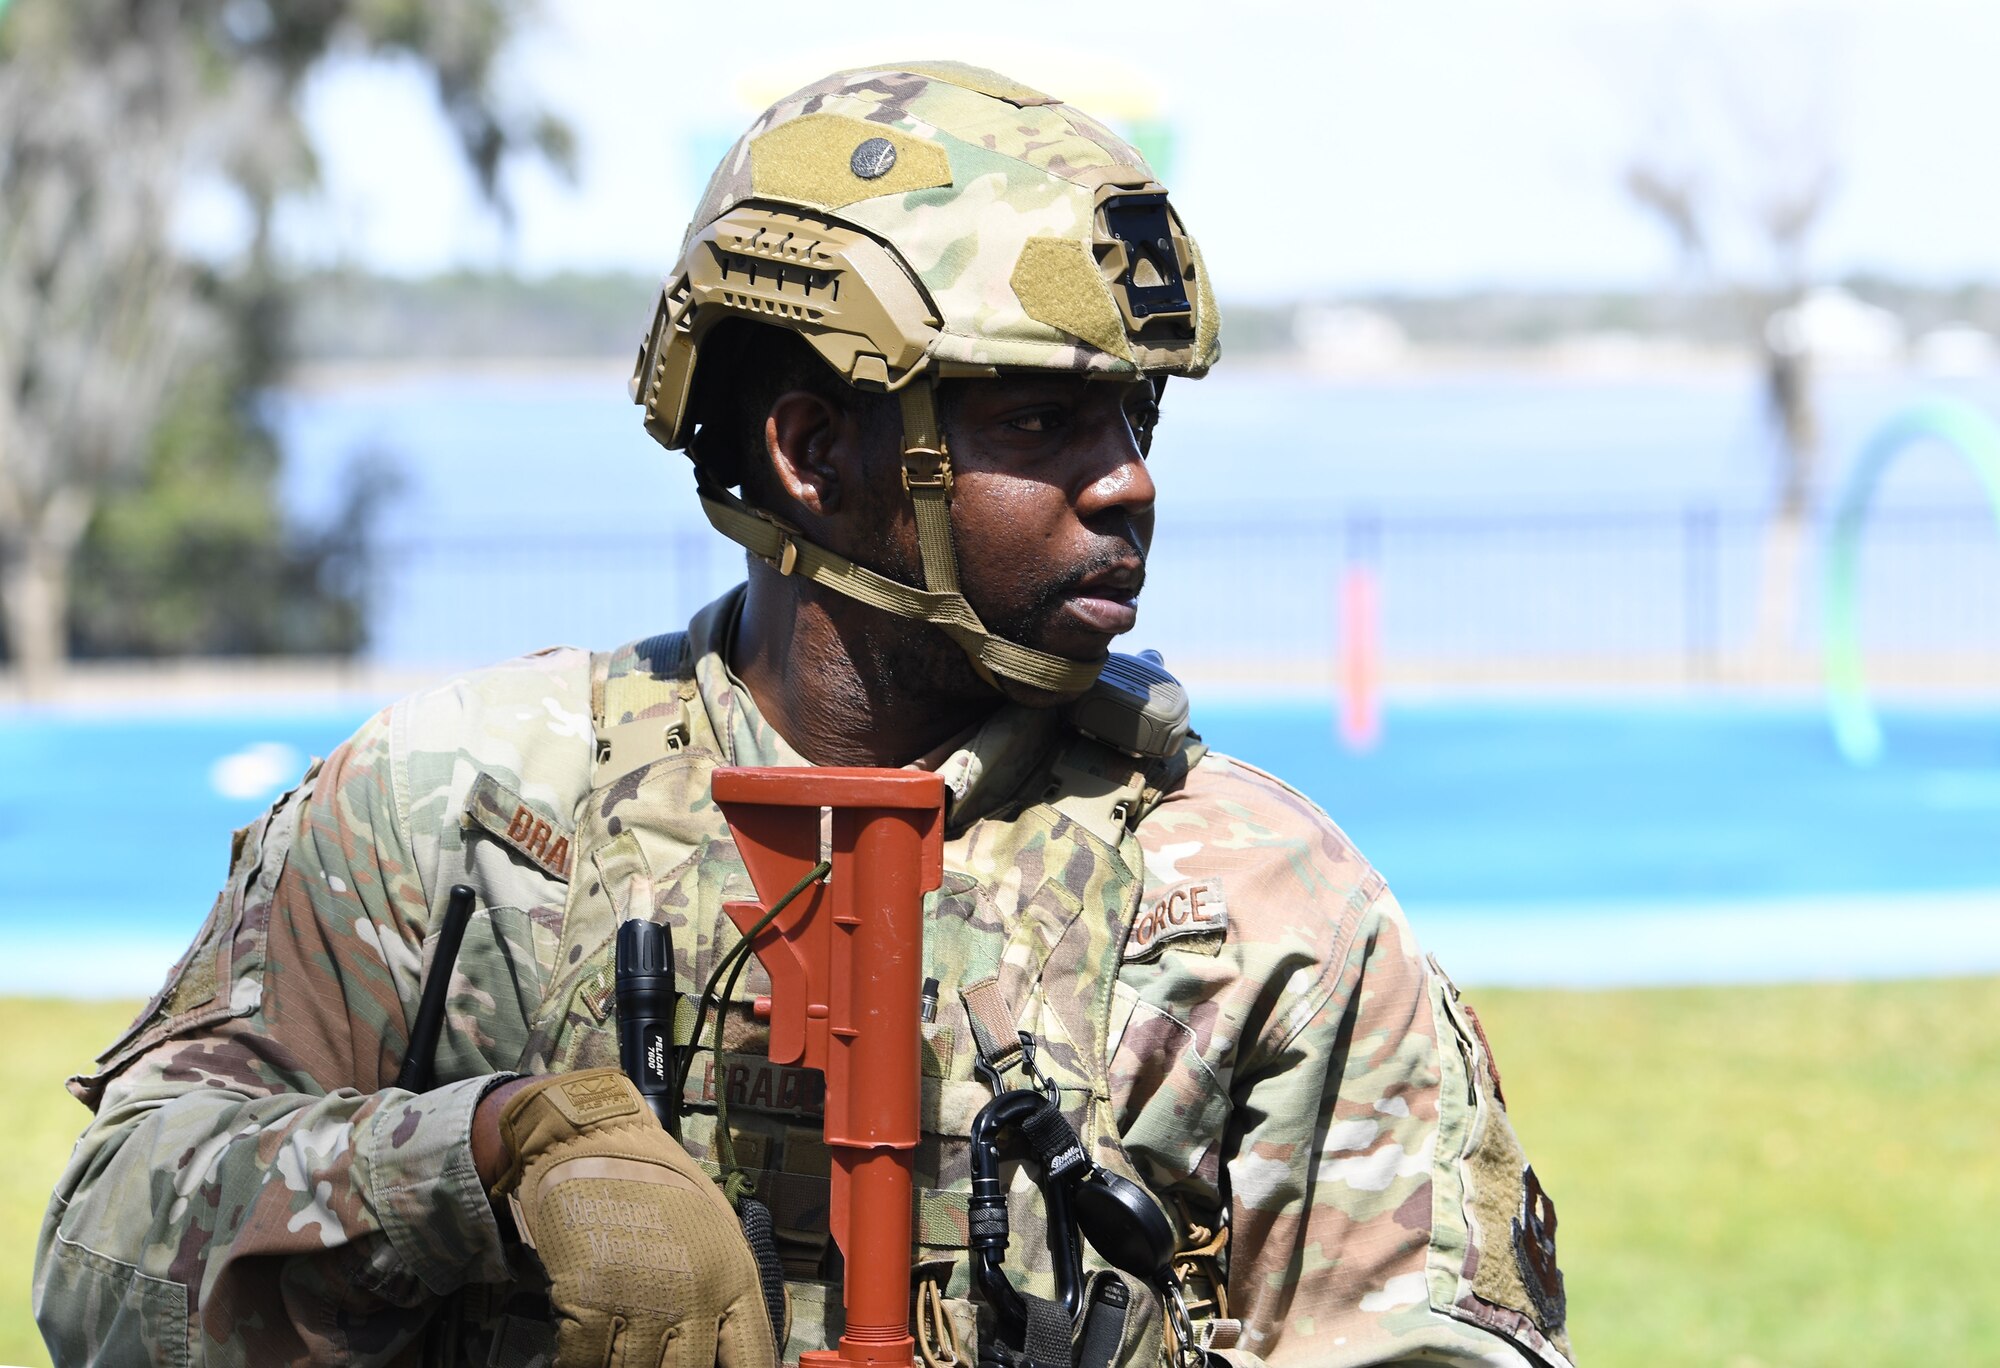 U.S. Air Force Staff Sgt. Quincy Bradley, 81st Security Forces Squadron patrolman, secures the area during an Antiterrorism, Force Protection and Chemical, Biological, Radiological, Nuclear exercise at Keesler Air Force Base, Mississippi, March 17, 2022. The exercise tested the base's ability to respond to and recover from a mass casualty event. (U.S. Air Force photo by Kemberly Groue)